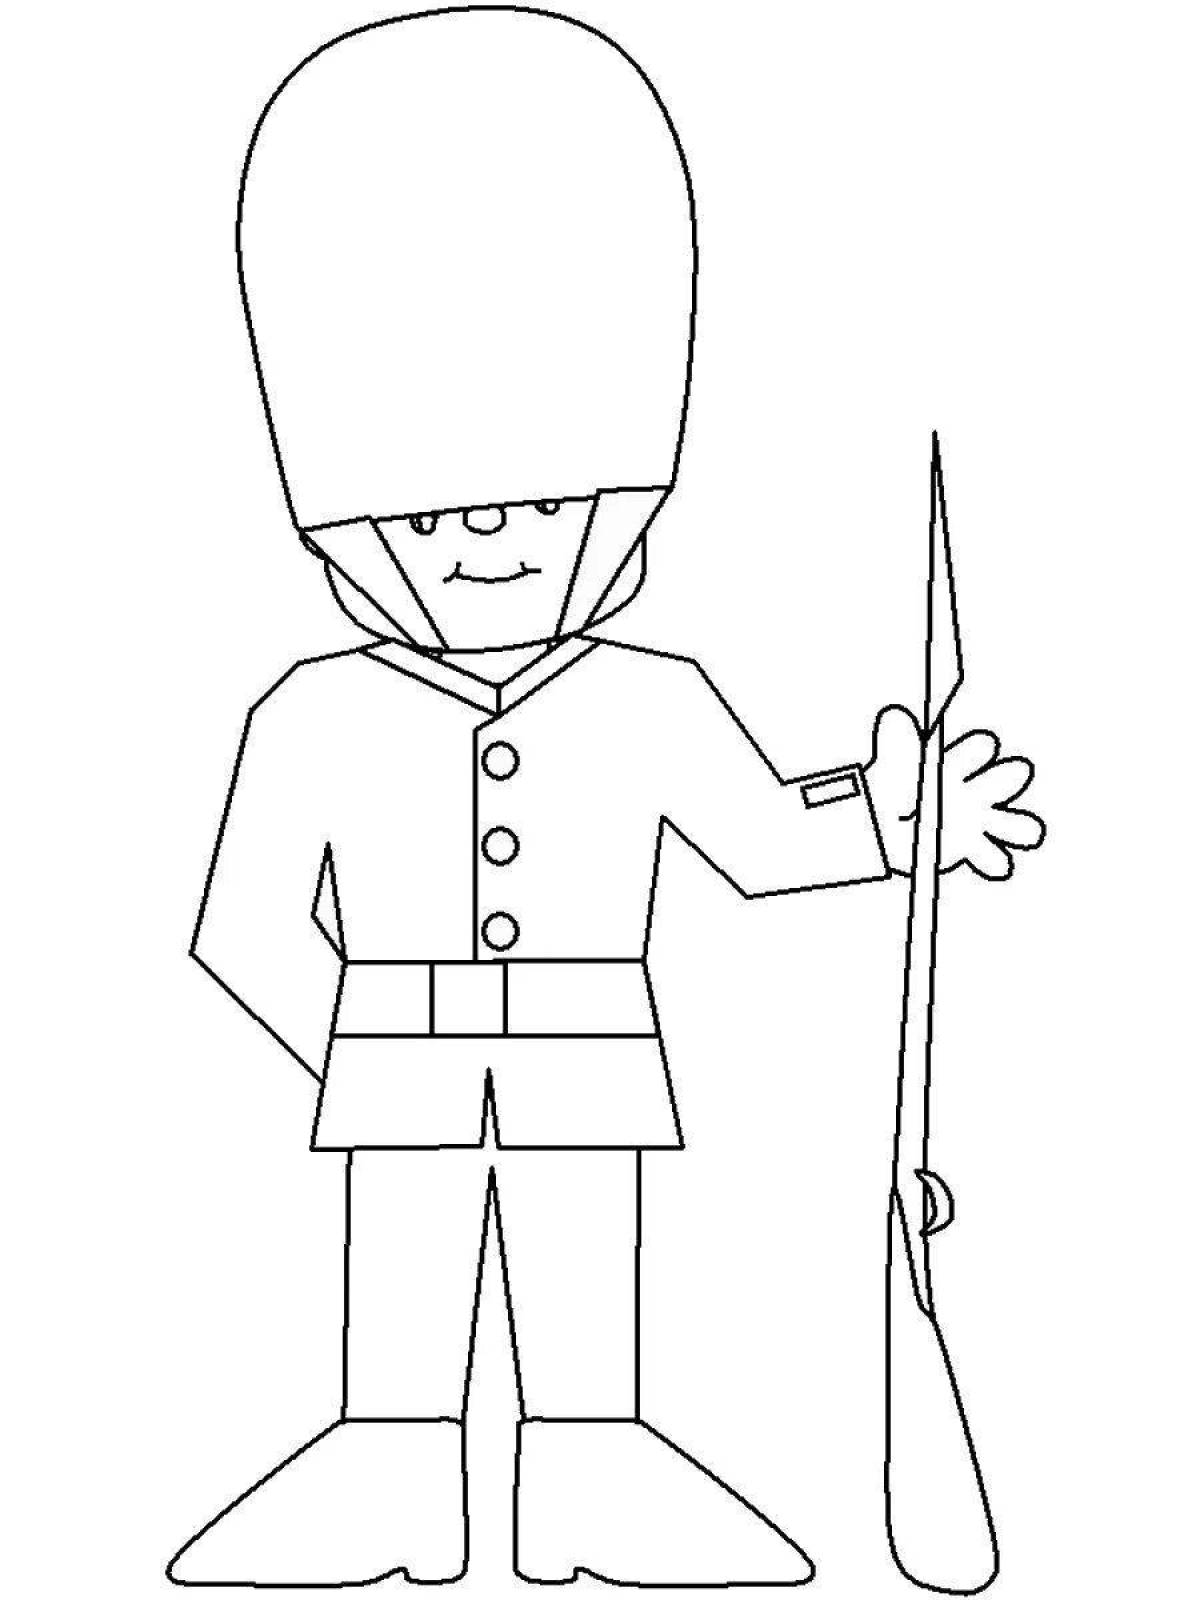 Fun toy soldier coloring book